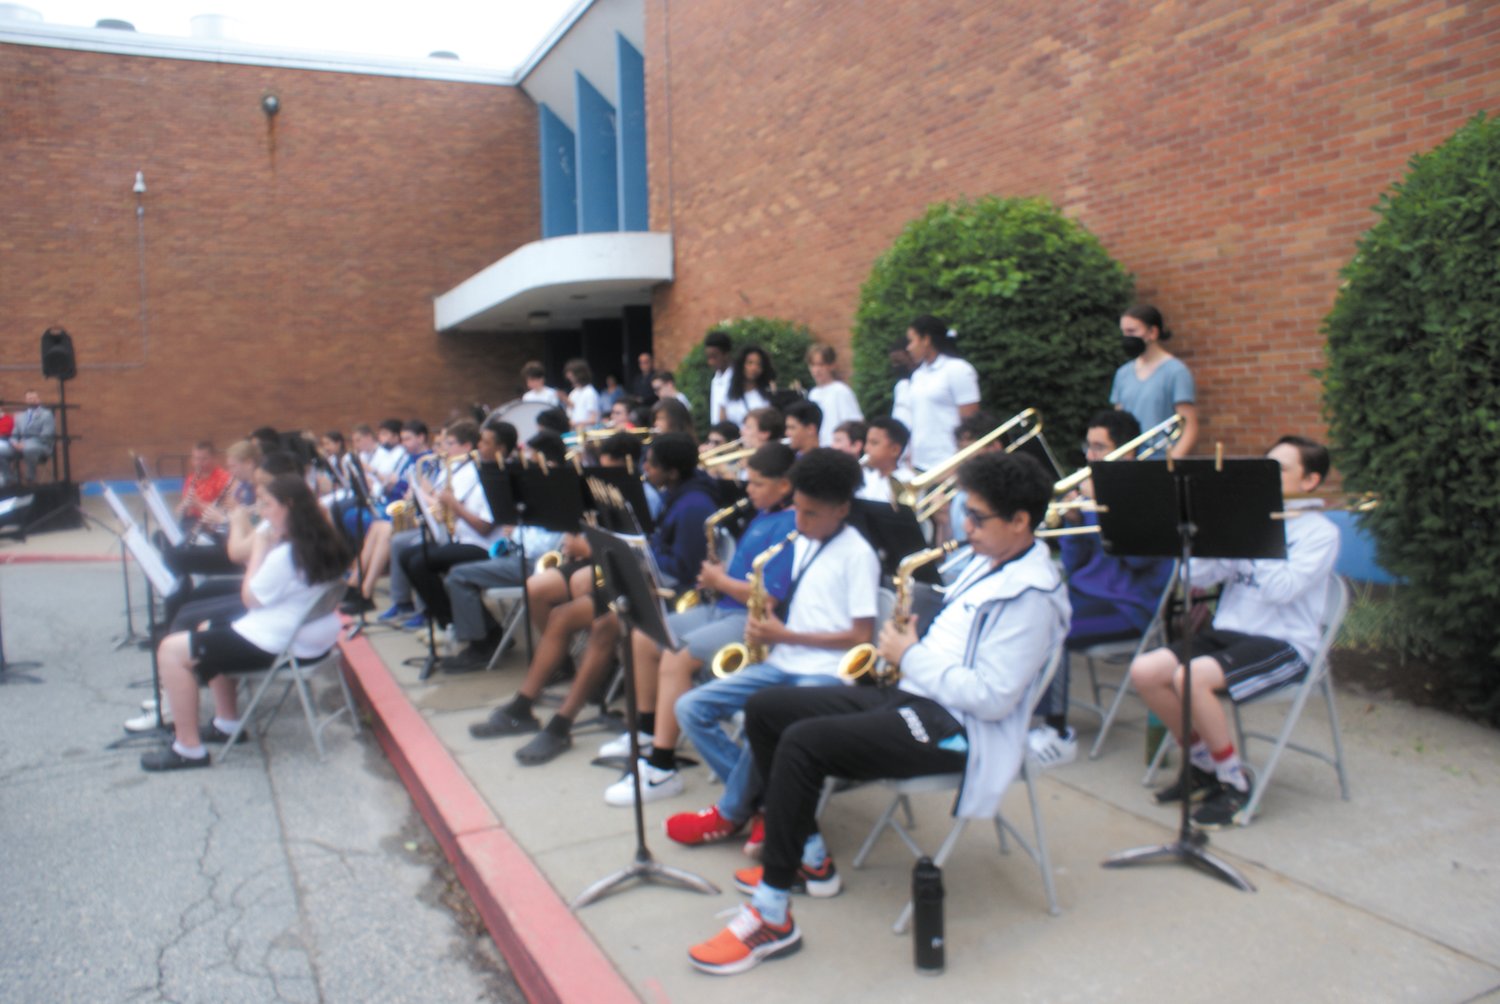 THE BAND PLAYED ON: Members of the Park View Middle School Band took part in the Memorial Day Ceremony held last Friday.